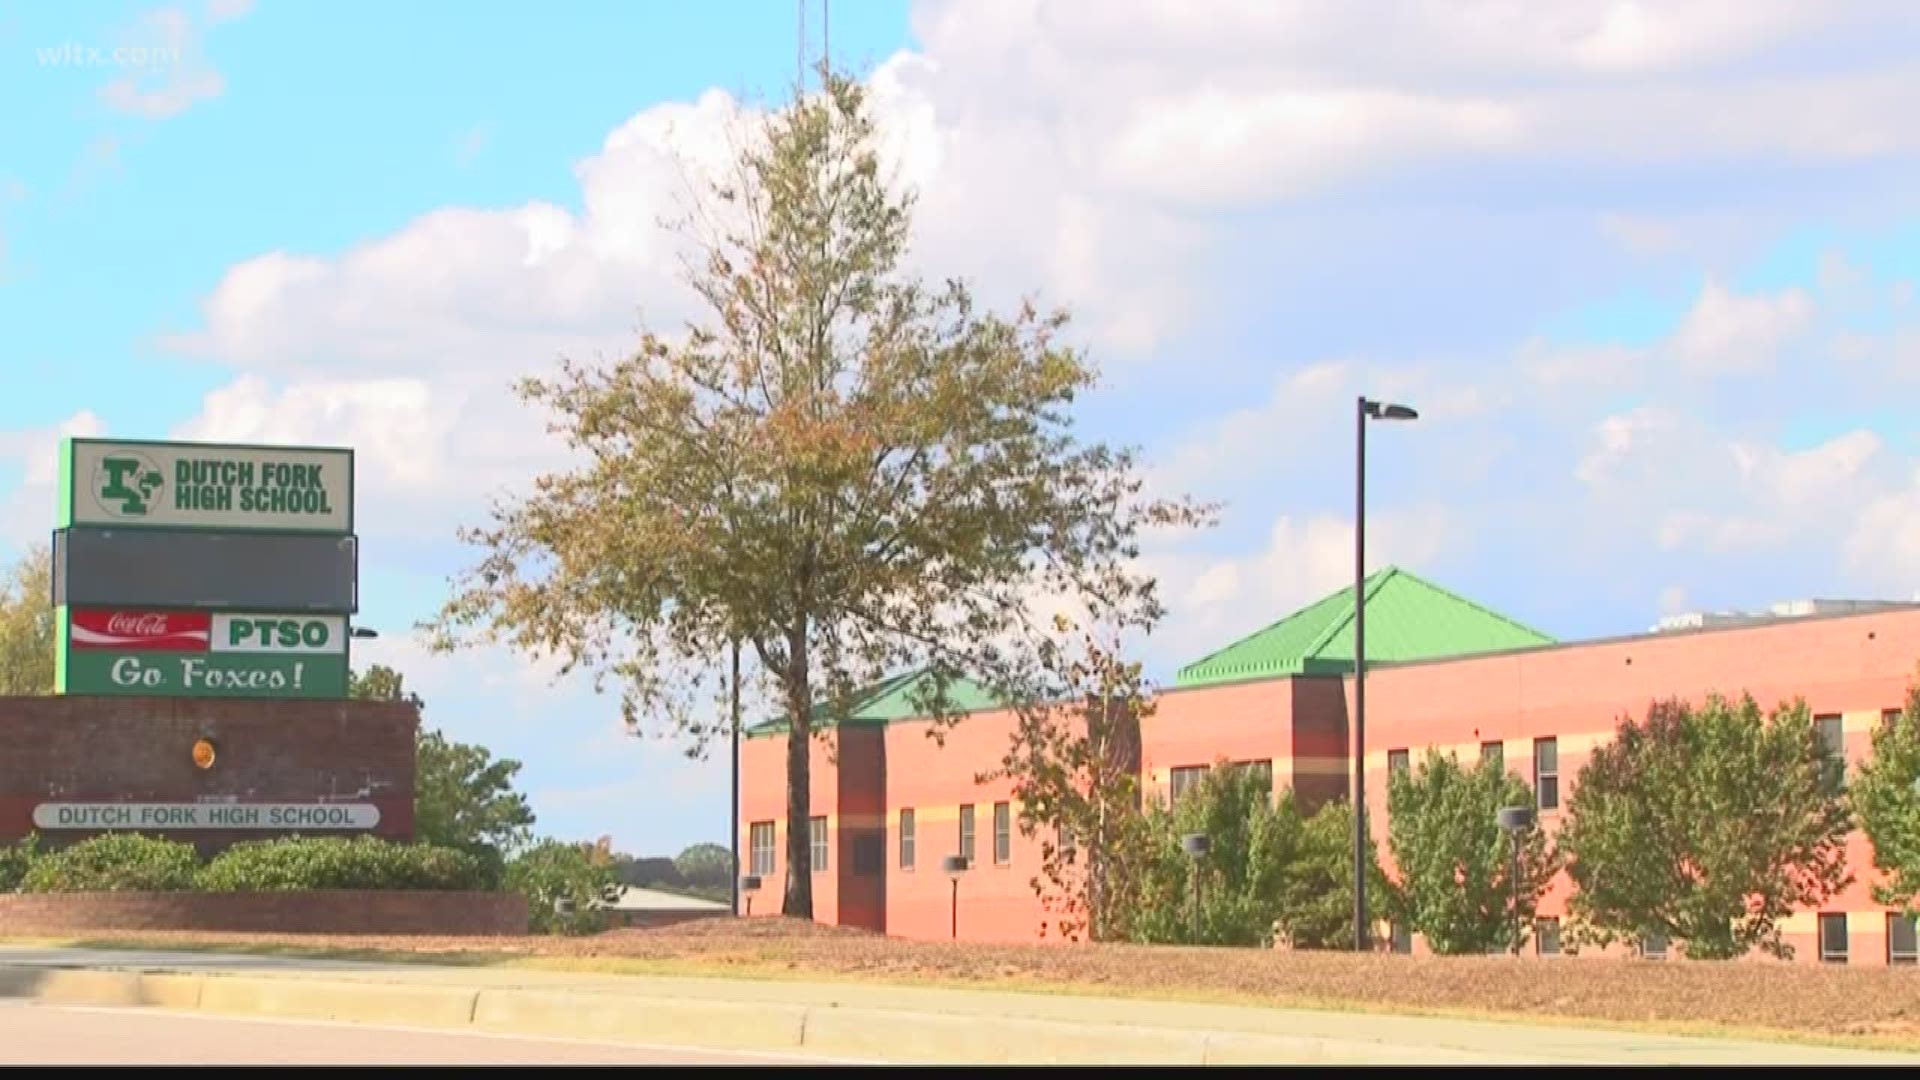 Deputies say the incident happened during school hours on Tuesday at Dutch Fork High School.